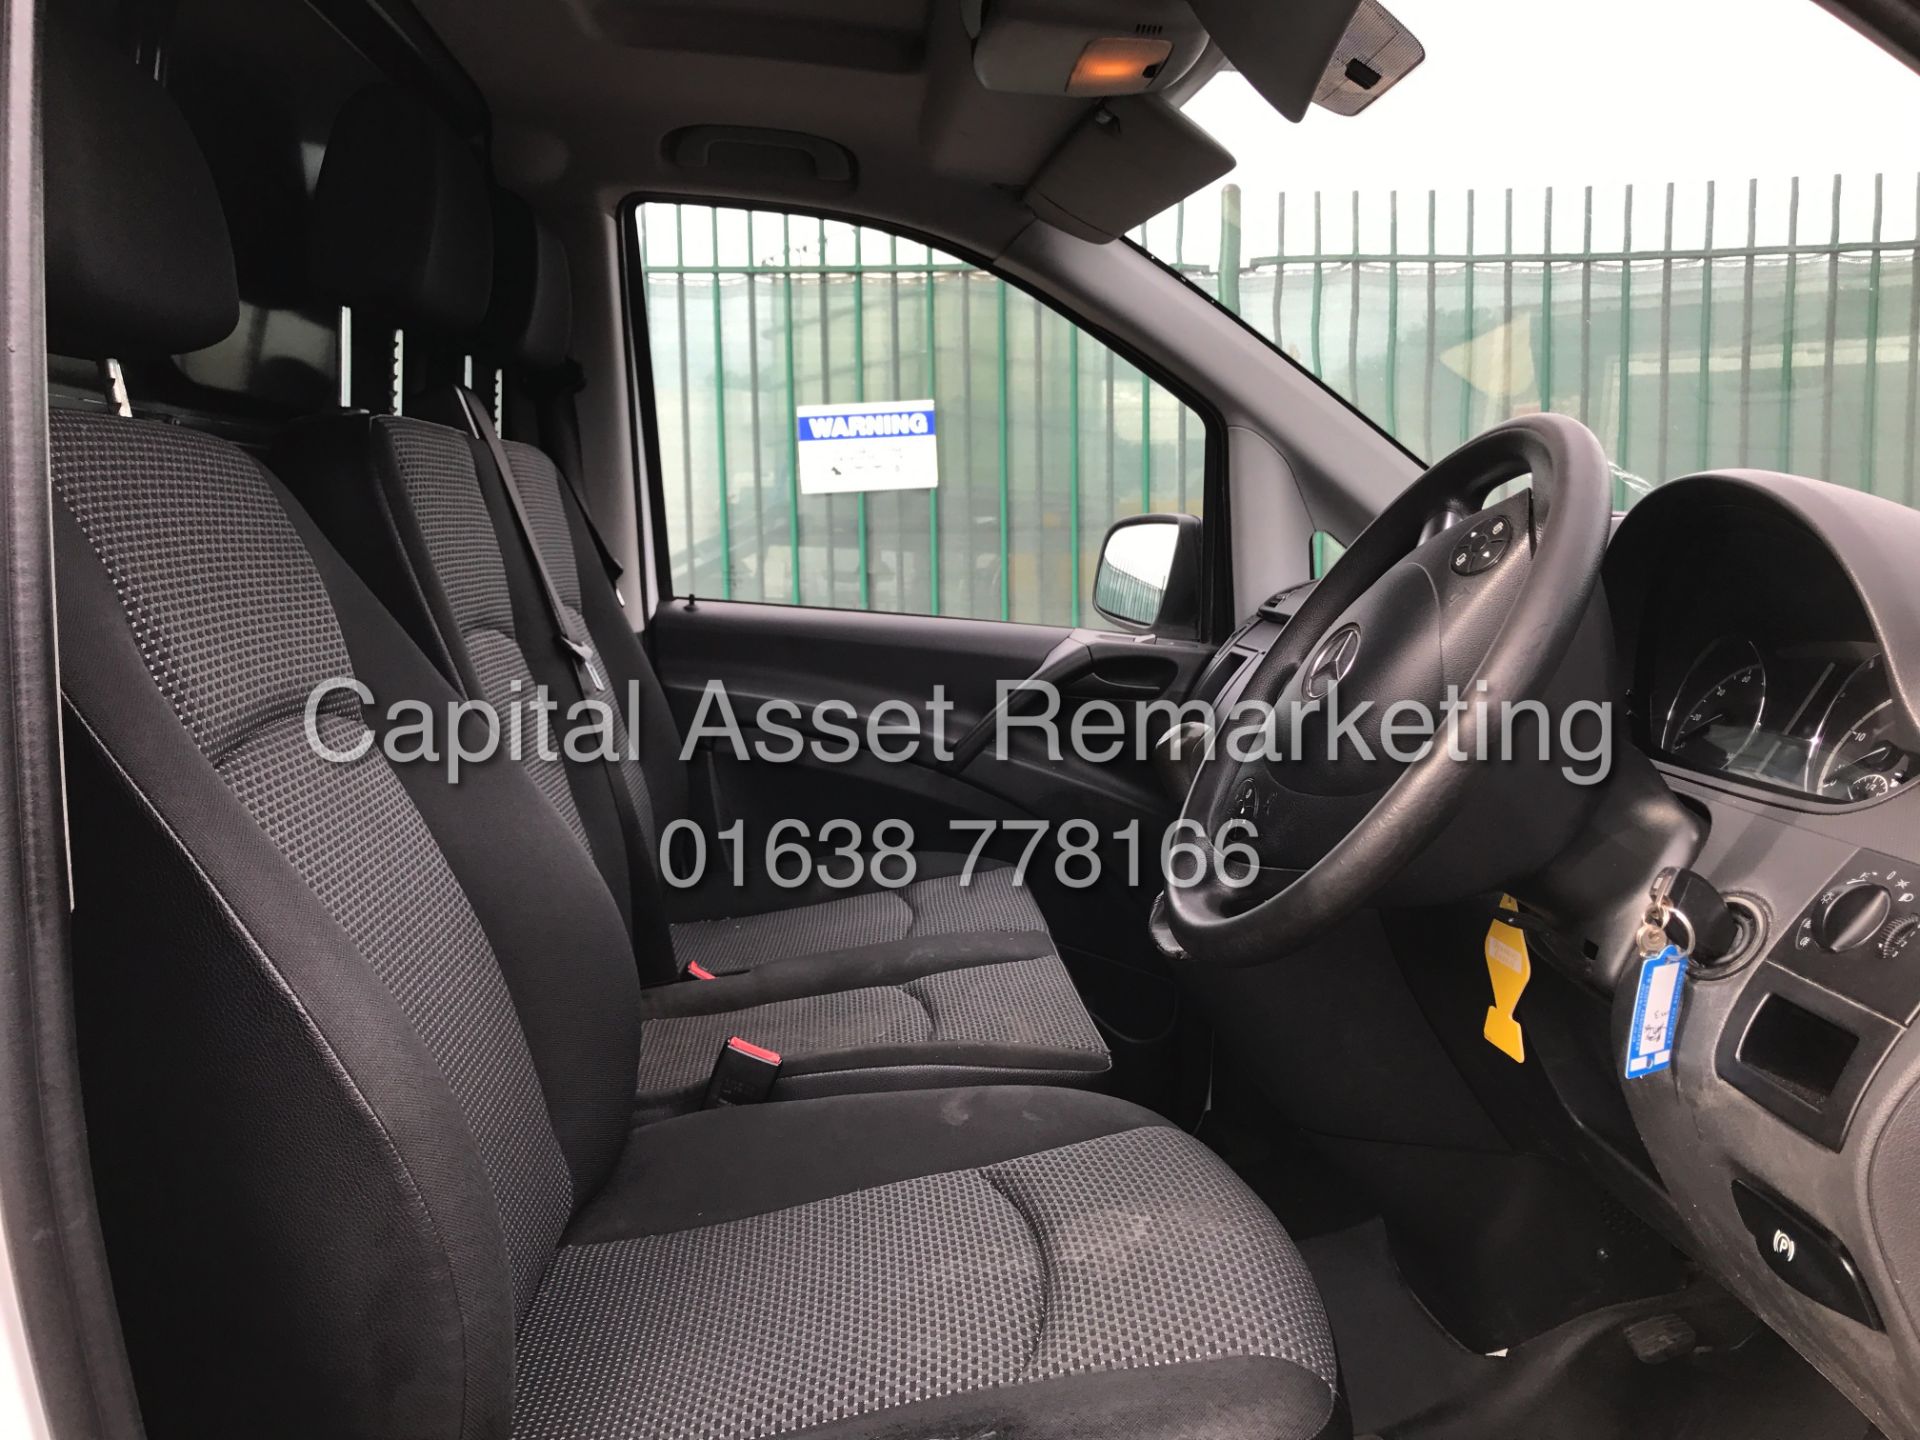 MERCEDES VITO 113CDI "136BHP - 6 SPEED" 13 REG NEW SHAPE - AIR CON - ELEC PACK - CRUISE - 1 OWNER - Image 6 of 13